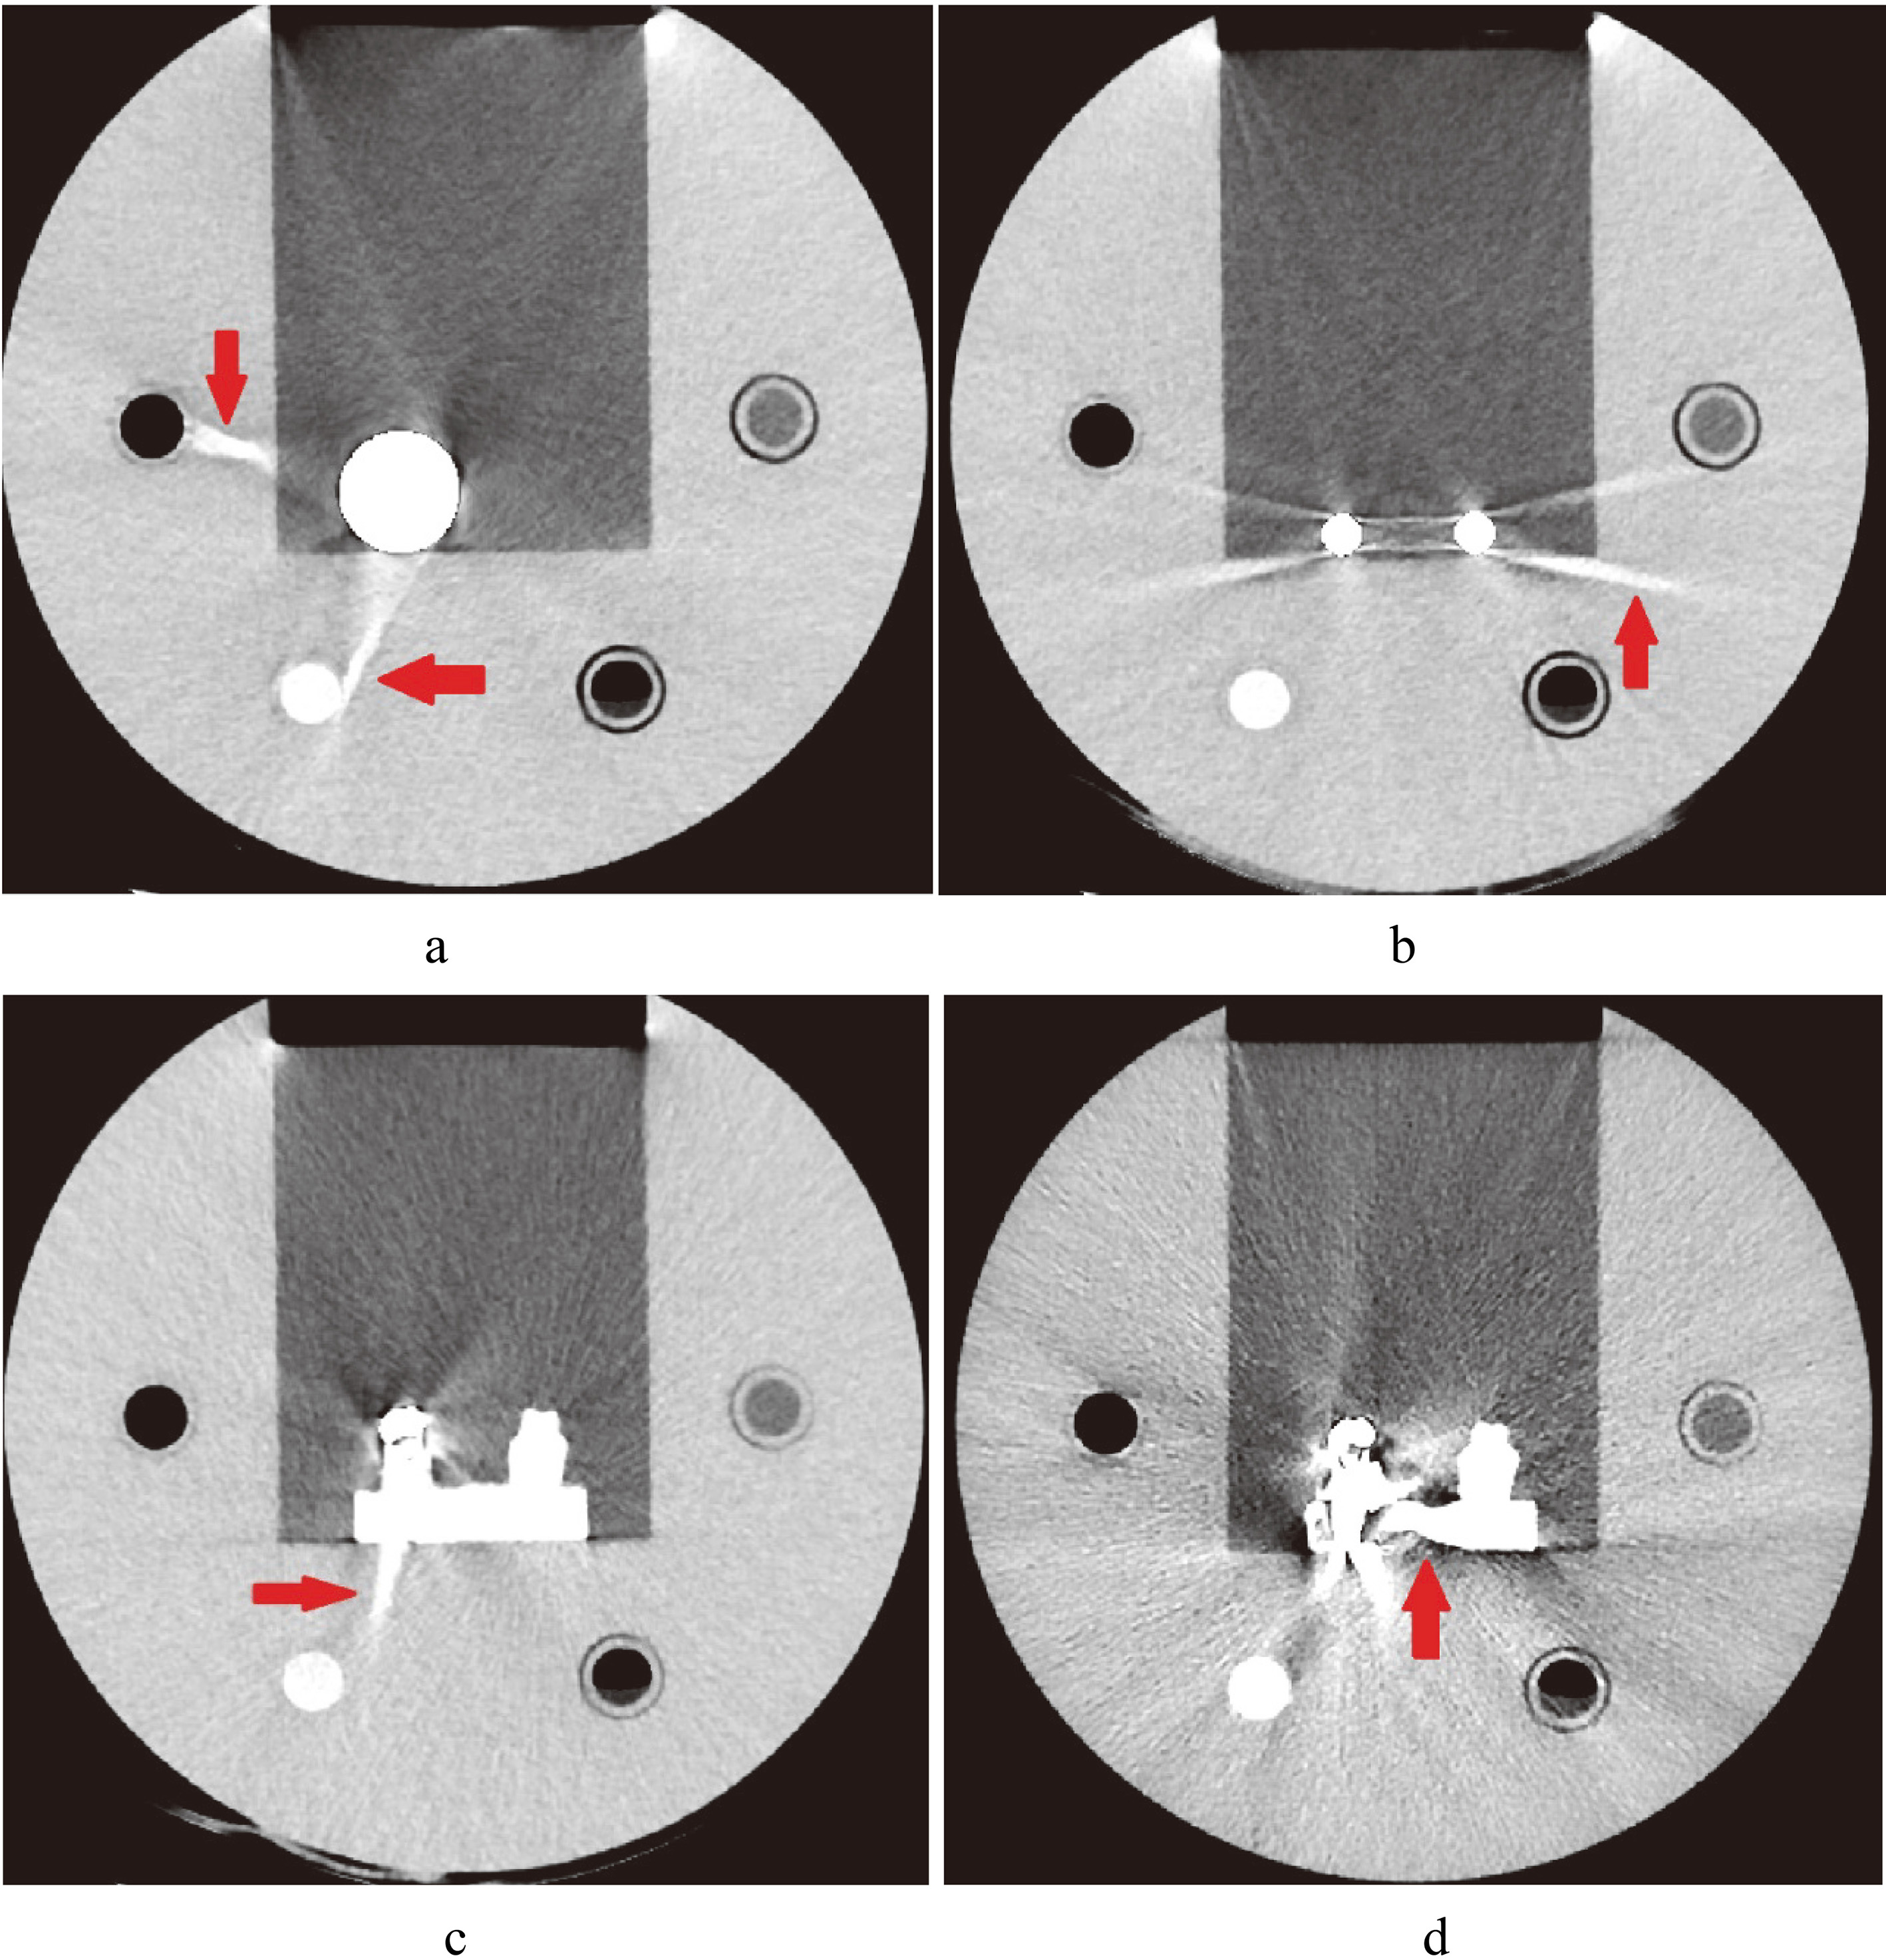 Images of artifacts caused by MAR. a. Image of hip implant with artifact caused by Smart-MAR (red arrow). b. Image of spinal implant with artifact caused by Smart-MAR (red arrow). c. Image of dental filling with artifact caused by Smart-MAR (red arrow). d. Image of dental filling with artifact caused by IMAR (red arrow).